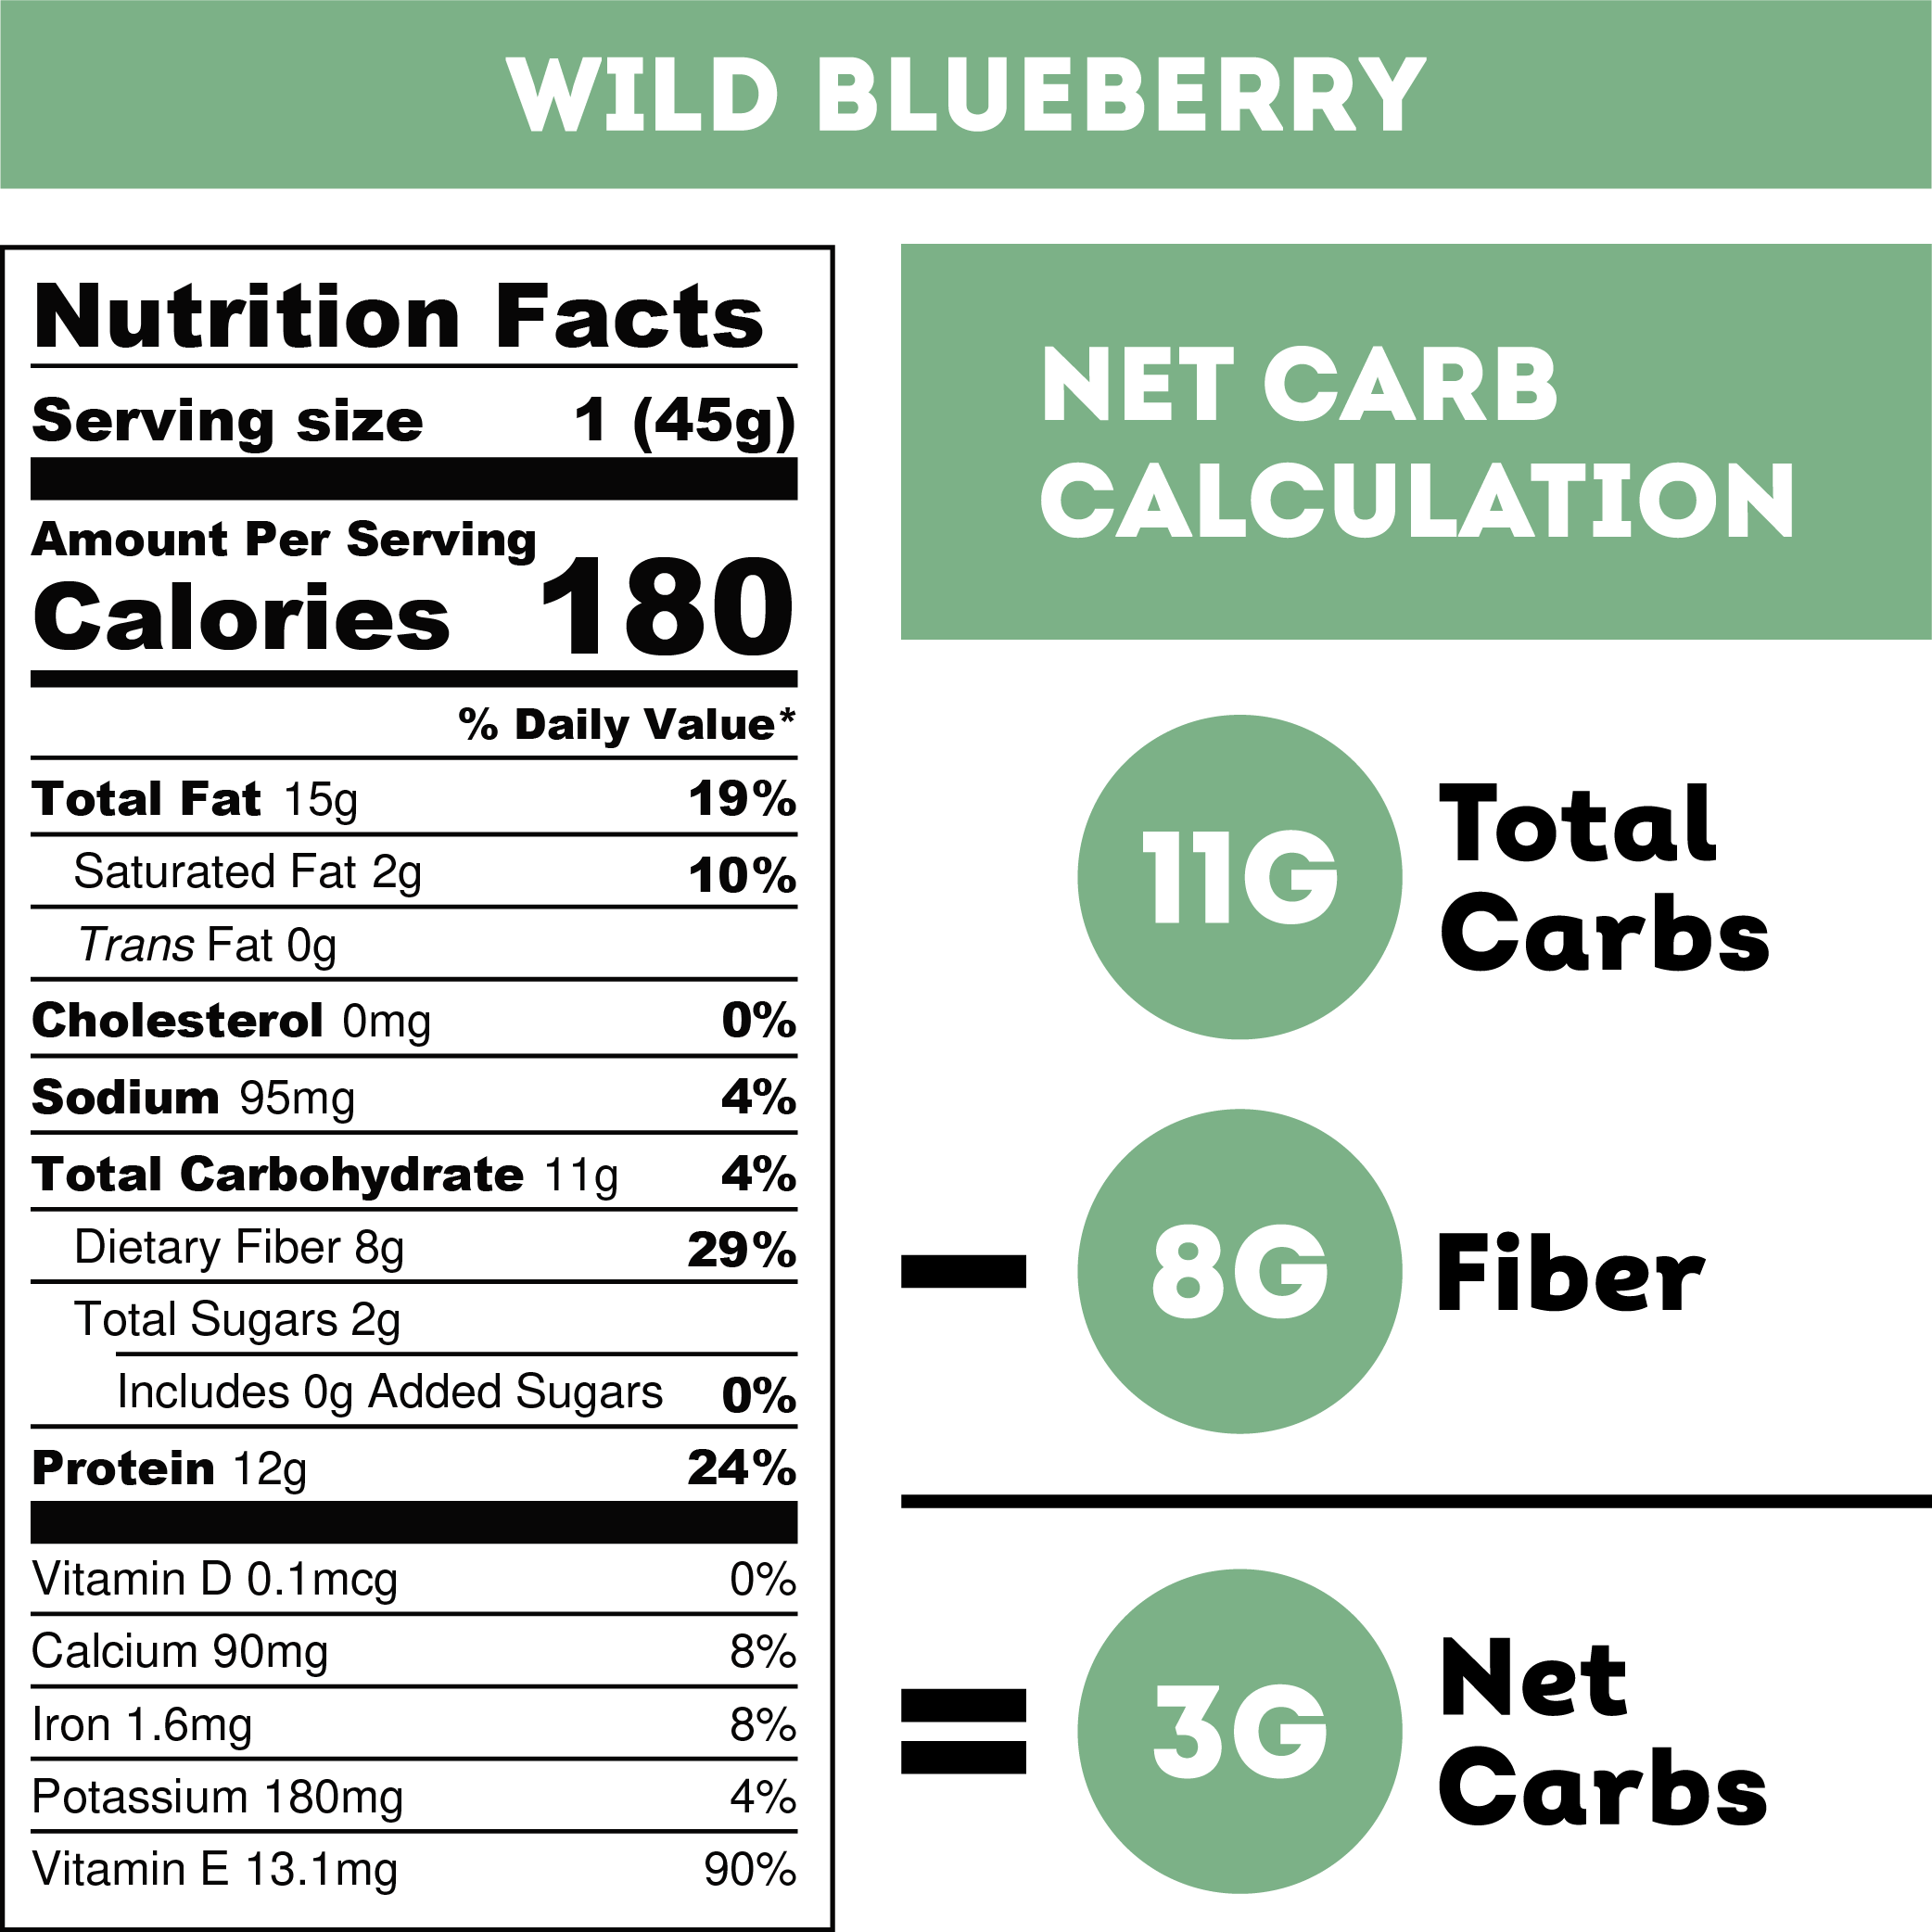 Wild Blueberry Nutrition Facts. Serving Size: 1 (45 grams). Amount Per Serving. Calories: 180. % Daily Value. Total Fat: 15 grams, 19%. Saturated Fat: 2 grams, 10%. Trans Fat: 0 grams. Cholesterol: 0 milligrams, 0%. Sodium: 95 milligrams, 4%. Total Carbohydrate: 11 grams, 4%. Dietary Fiber: 8 grams, 29%. Total Sugars: 2 grams. Includes: 0 grams Added Sugars, 0%. Protein: 12 grams, 24%. Vitamin D: 0.1 micrograms, 0%. Calcium: 90 milligrams, 8%. Iron: 1.6 milligrams, 8%. Potassium: 180 milligrams, 4%. Vitamin E: 13.1 milligrams, 90%.